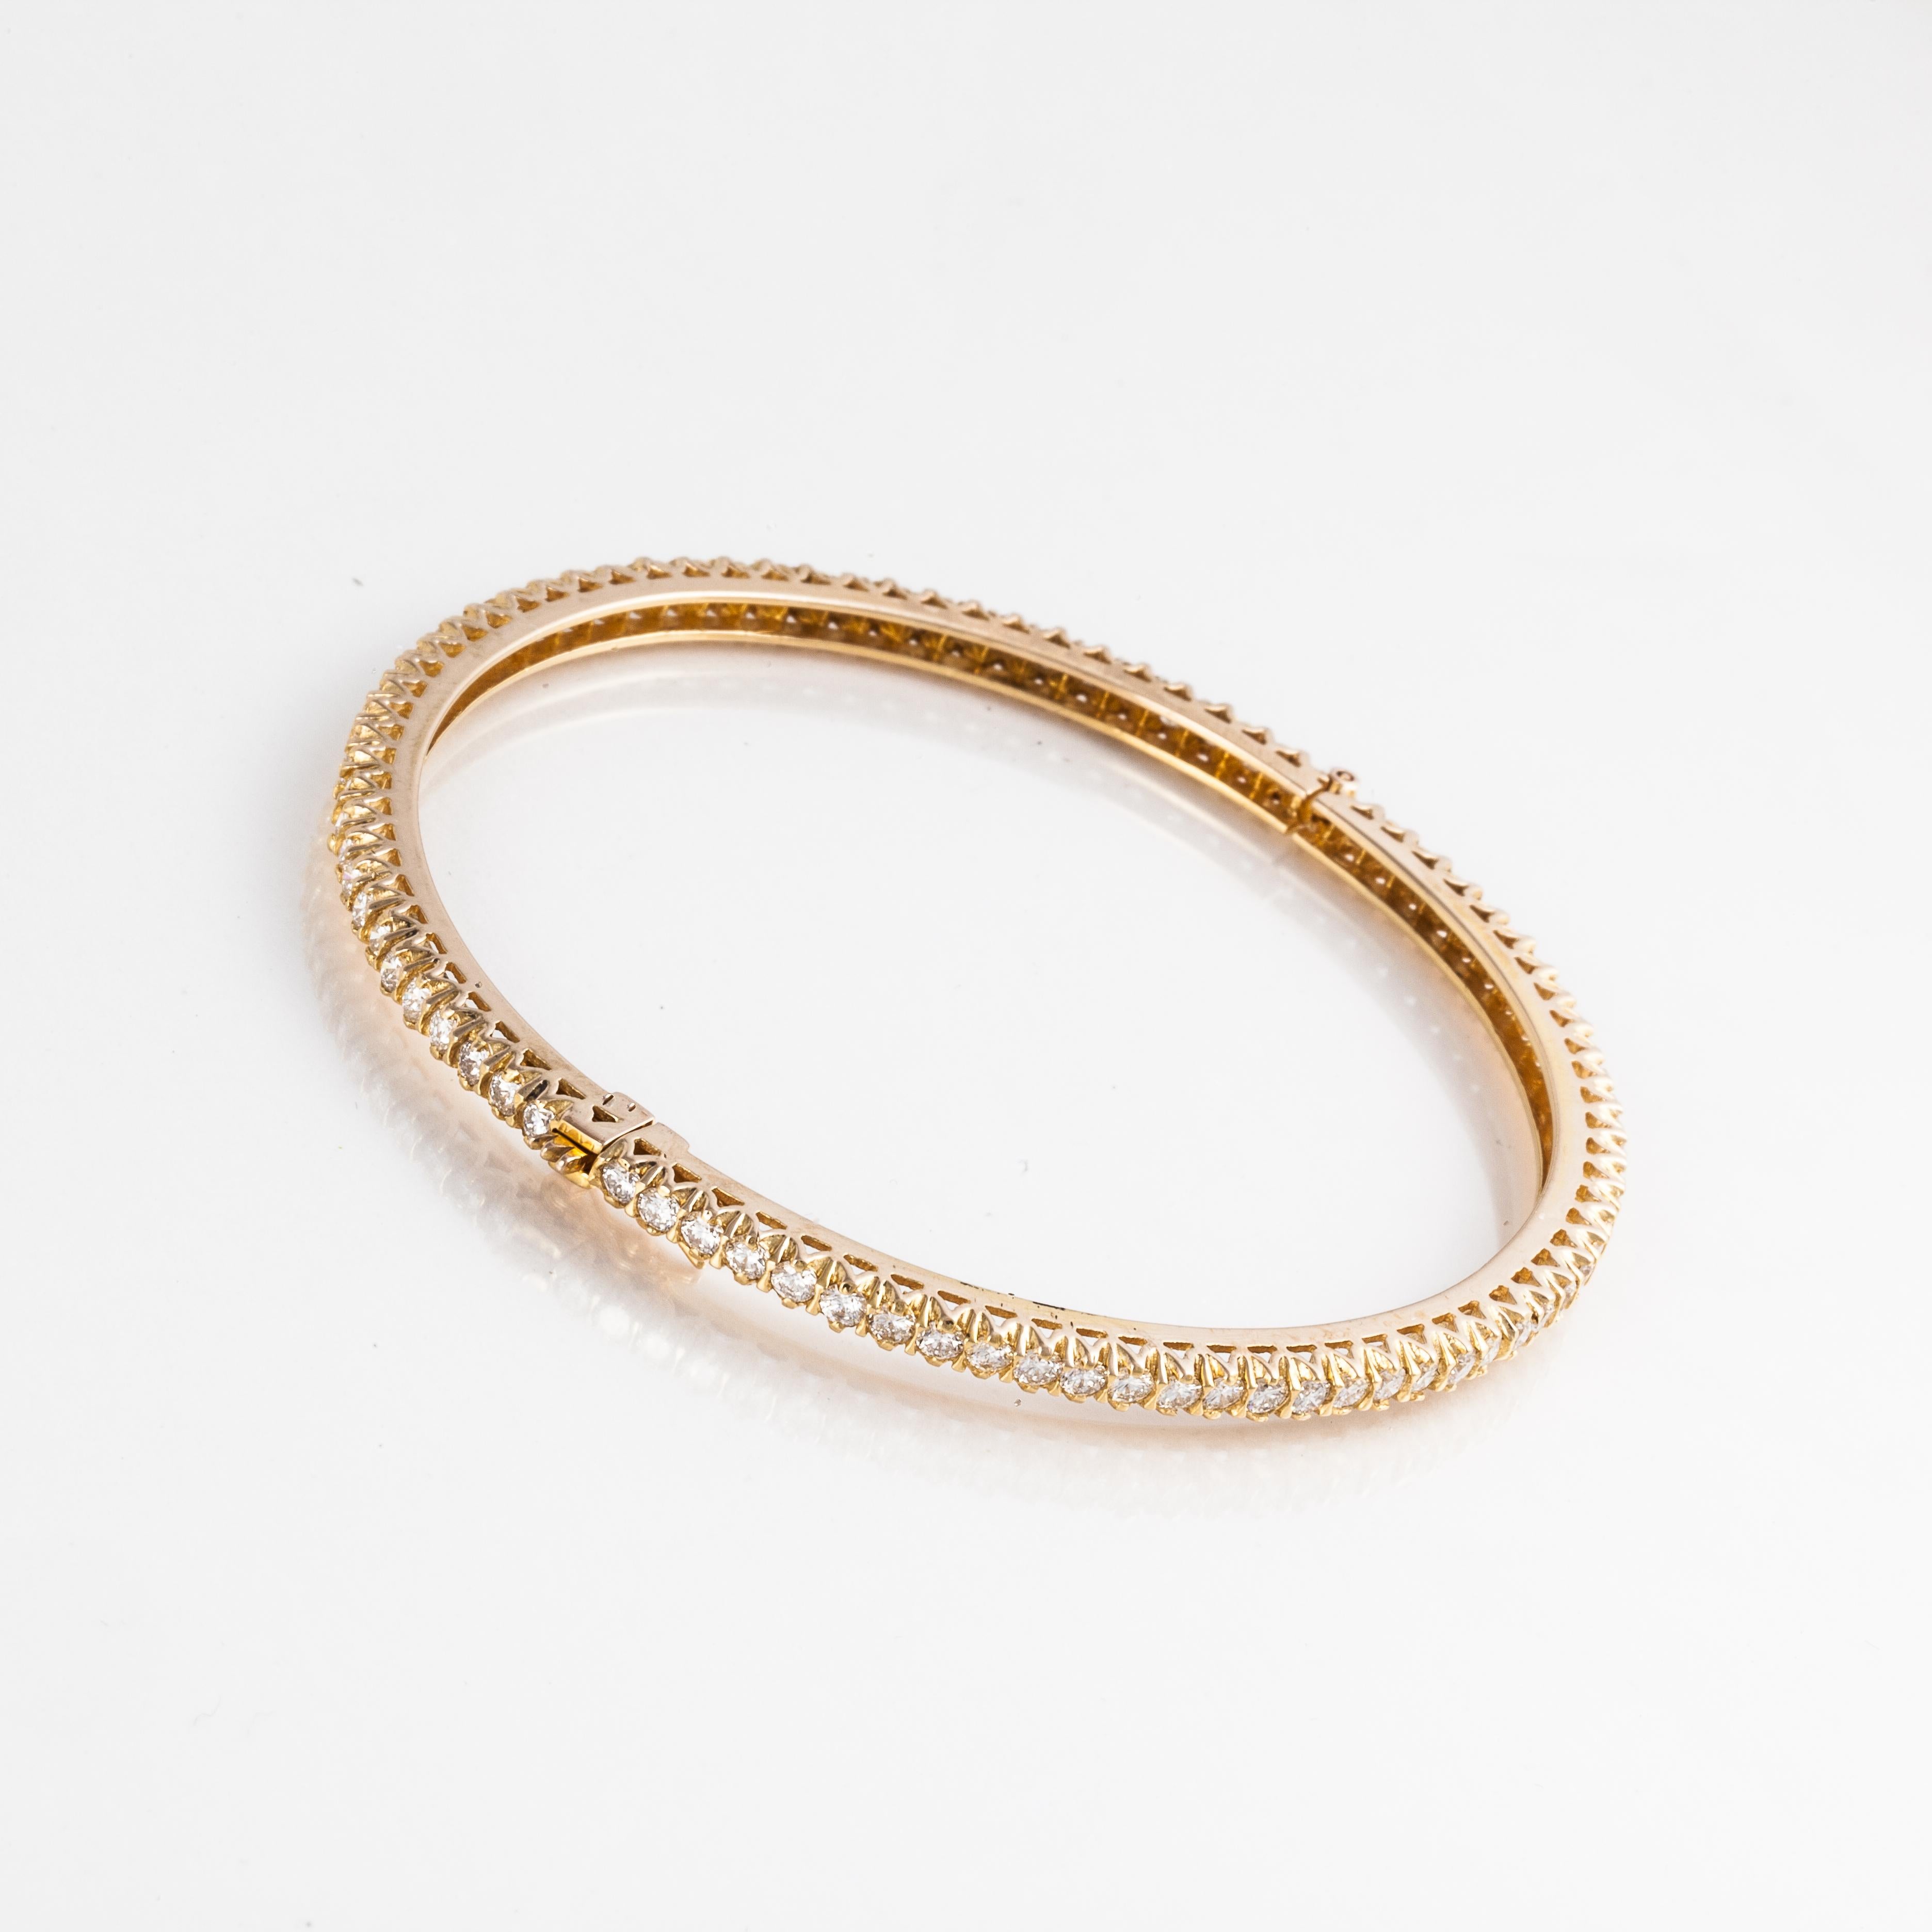 18K yellow gold bangle bracelet with round diamonds all the way around.  There are a total of 84 round diamonds that total 5 carats; G-H color and VS-SI clarity.  Bracelet measures 1/8 inches wide and the inside diameter is 2 1/4 inches.  Hinged